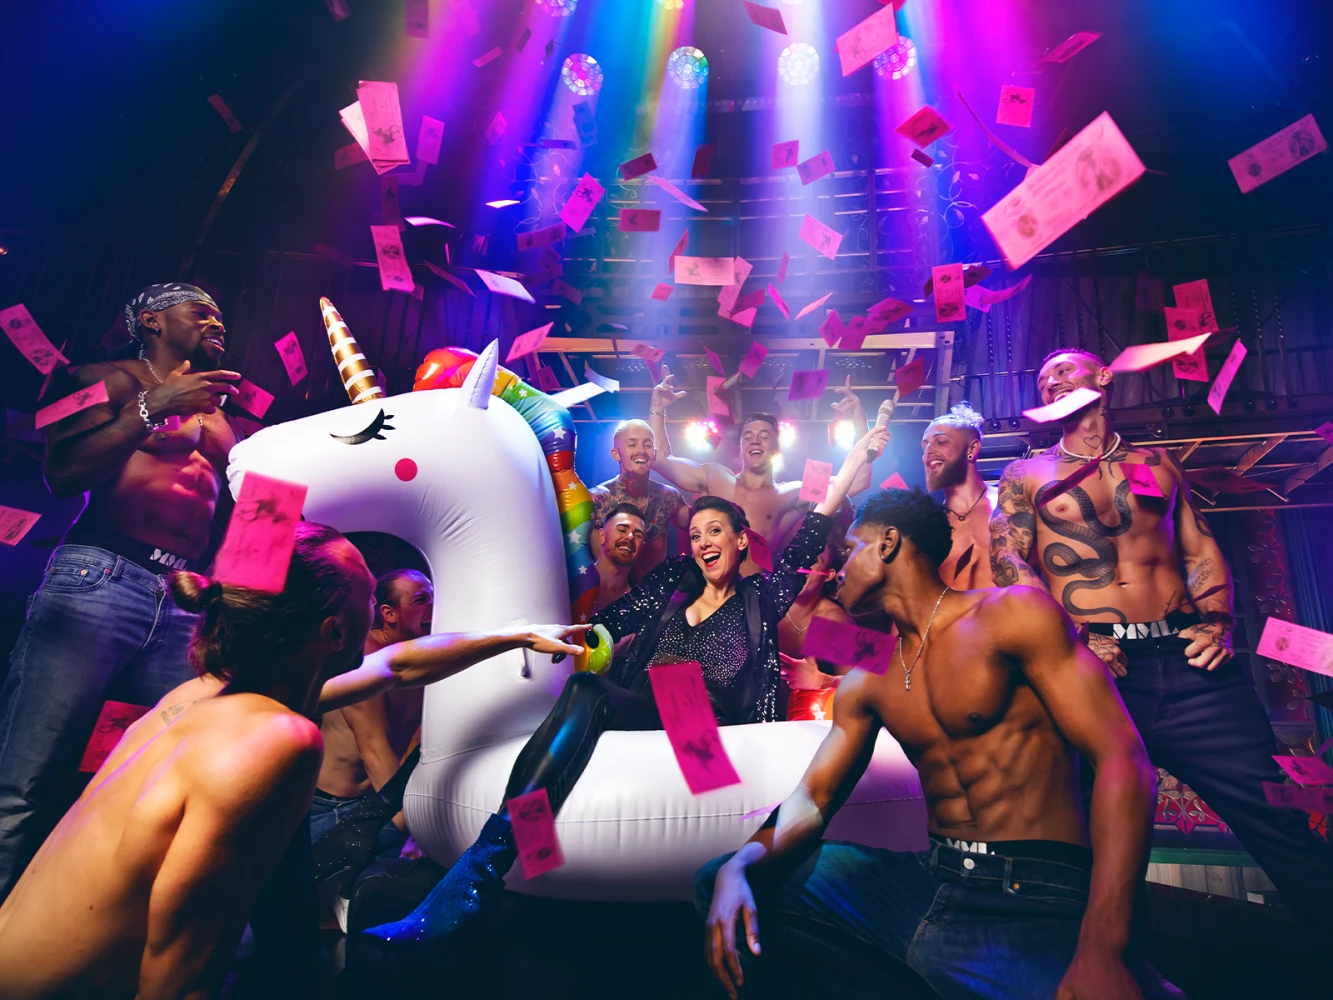 Magic Mike Live: What to expect - 4